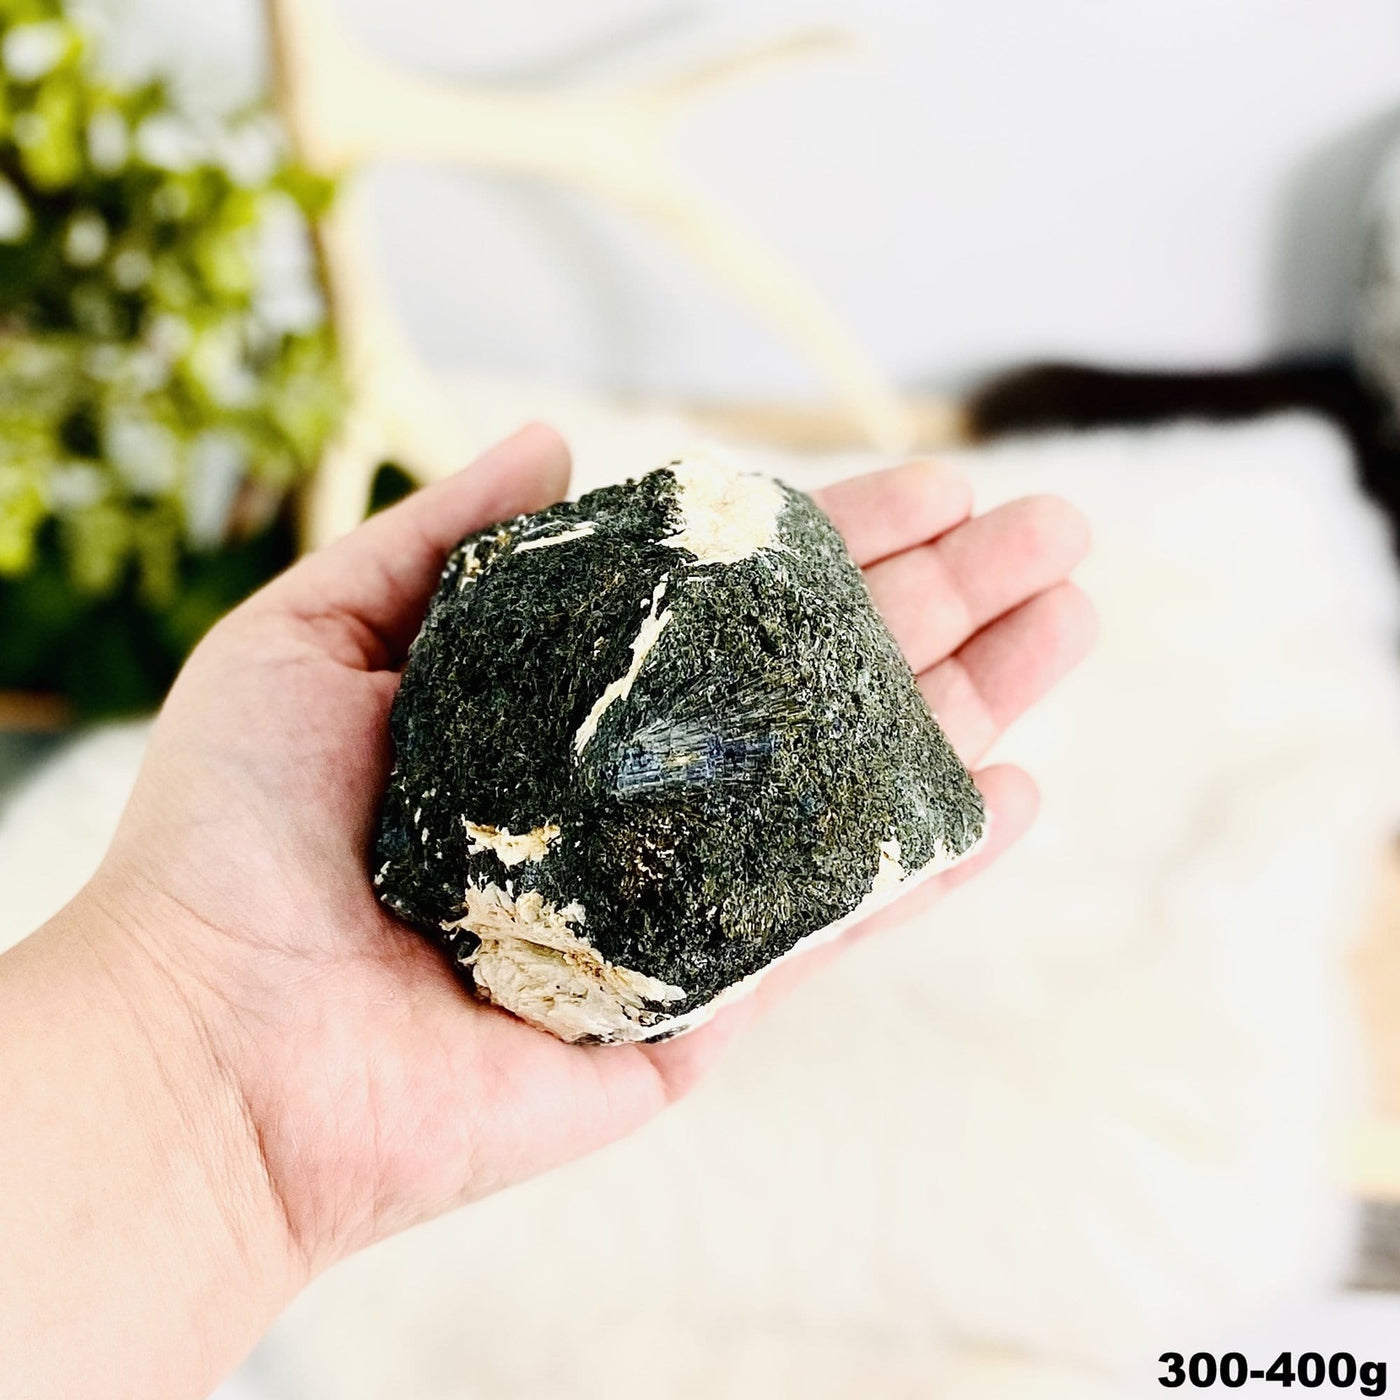 1 piece of Epidote In Quartz Chunk in hand showing the weight 300 to 400 grams on white background.